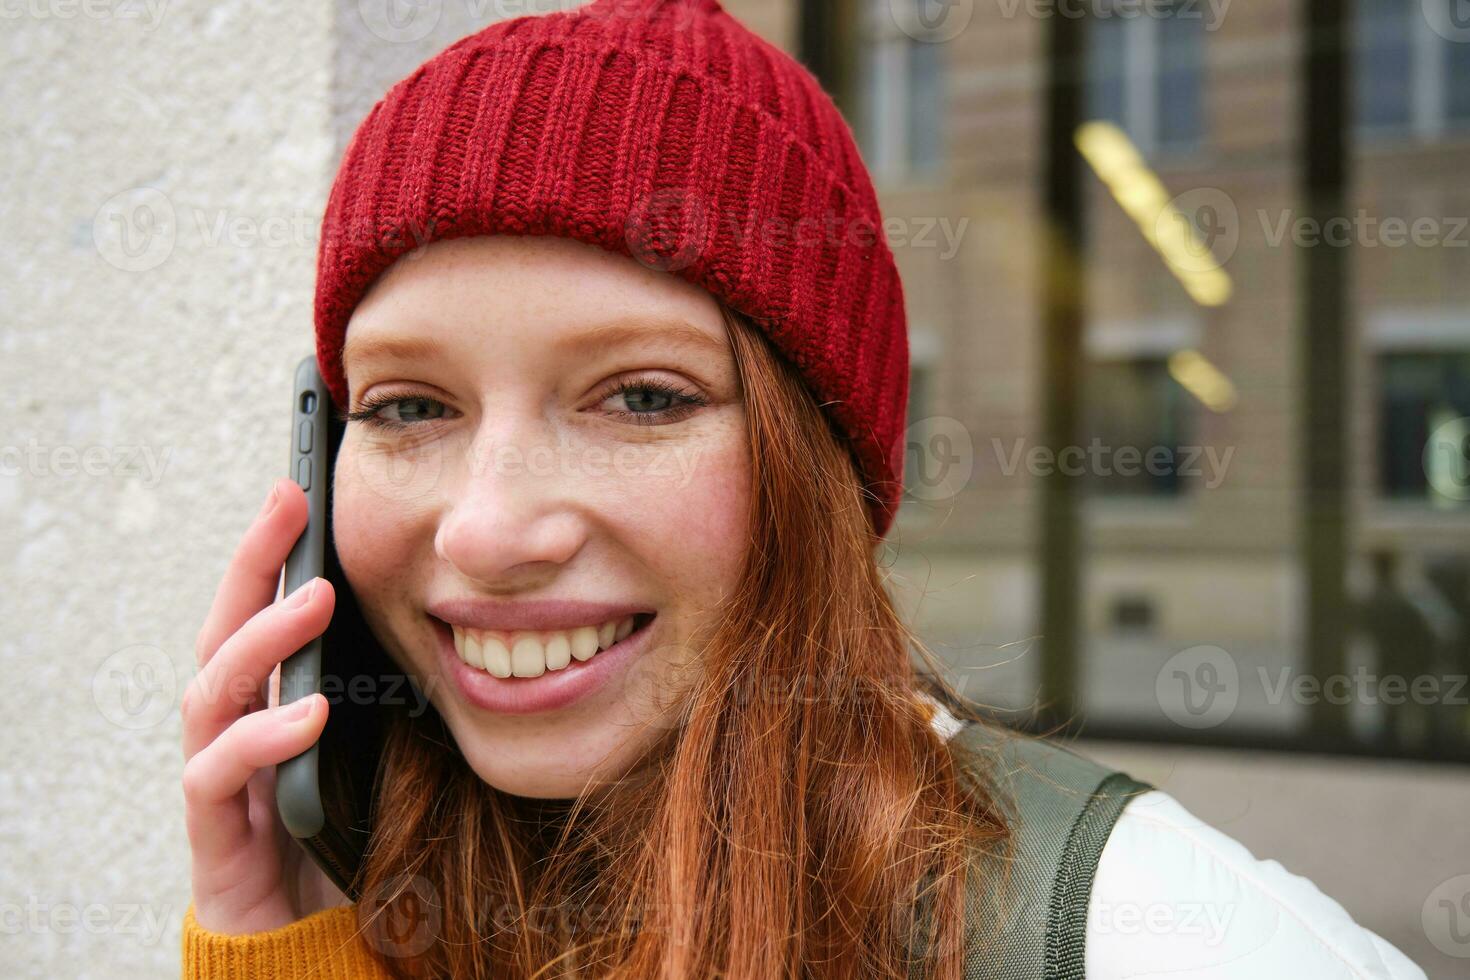 Young people and mobile connection. Happy redhead girl talks on phone, makes telephone call, stands outdoors with backpack and uses smartphone app photo